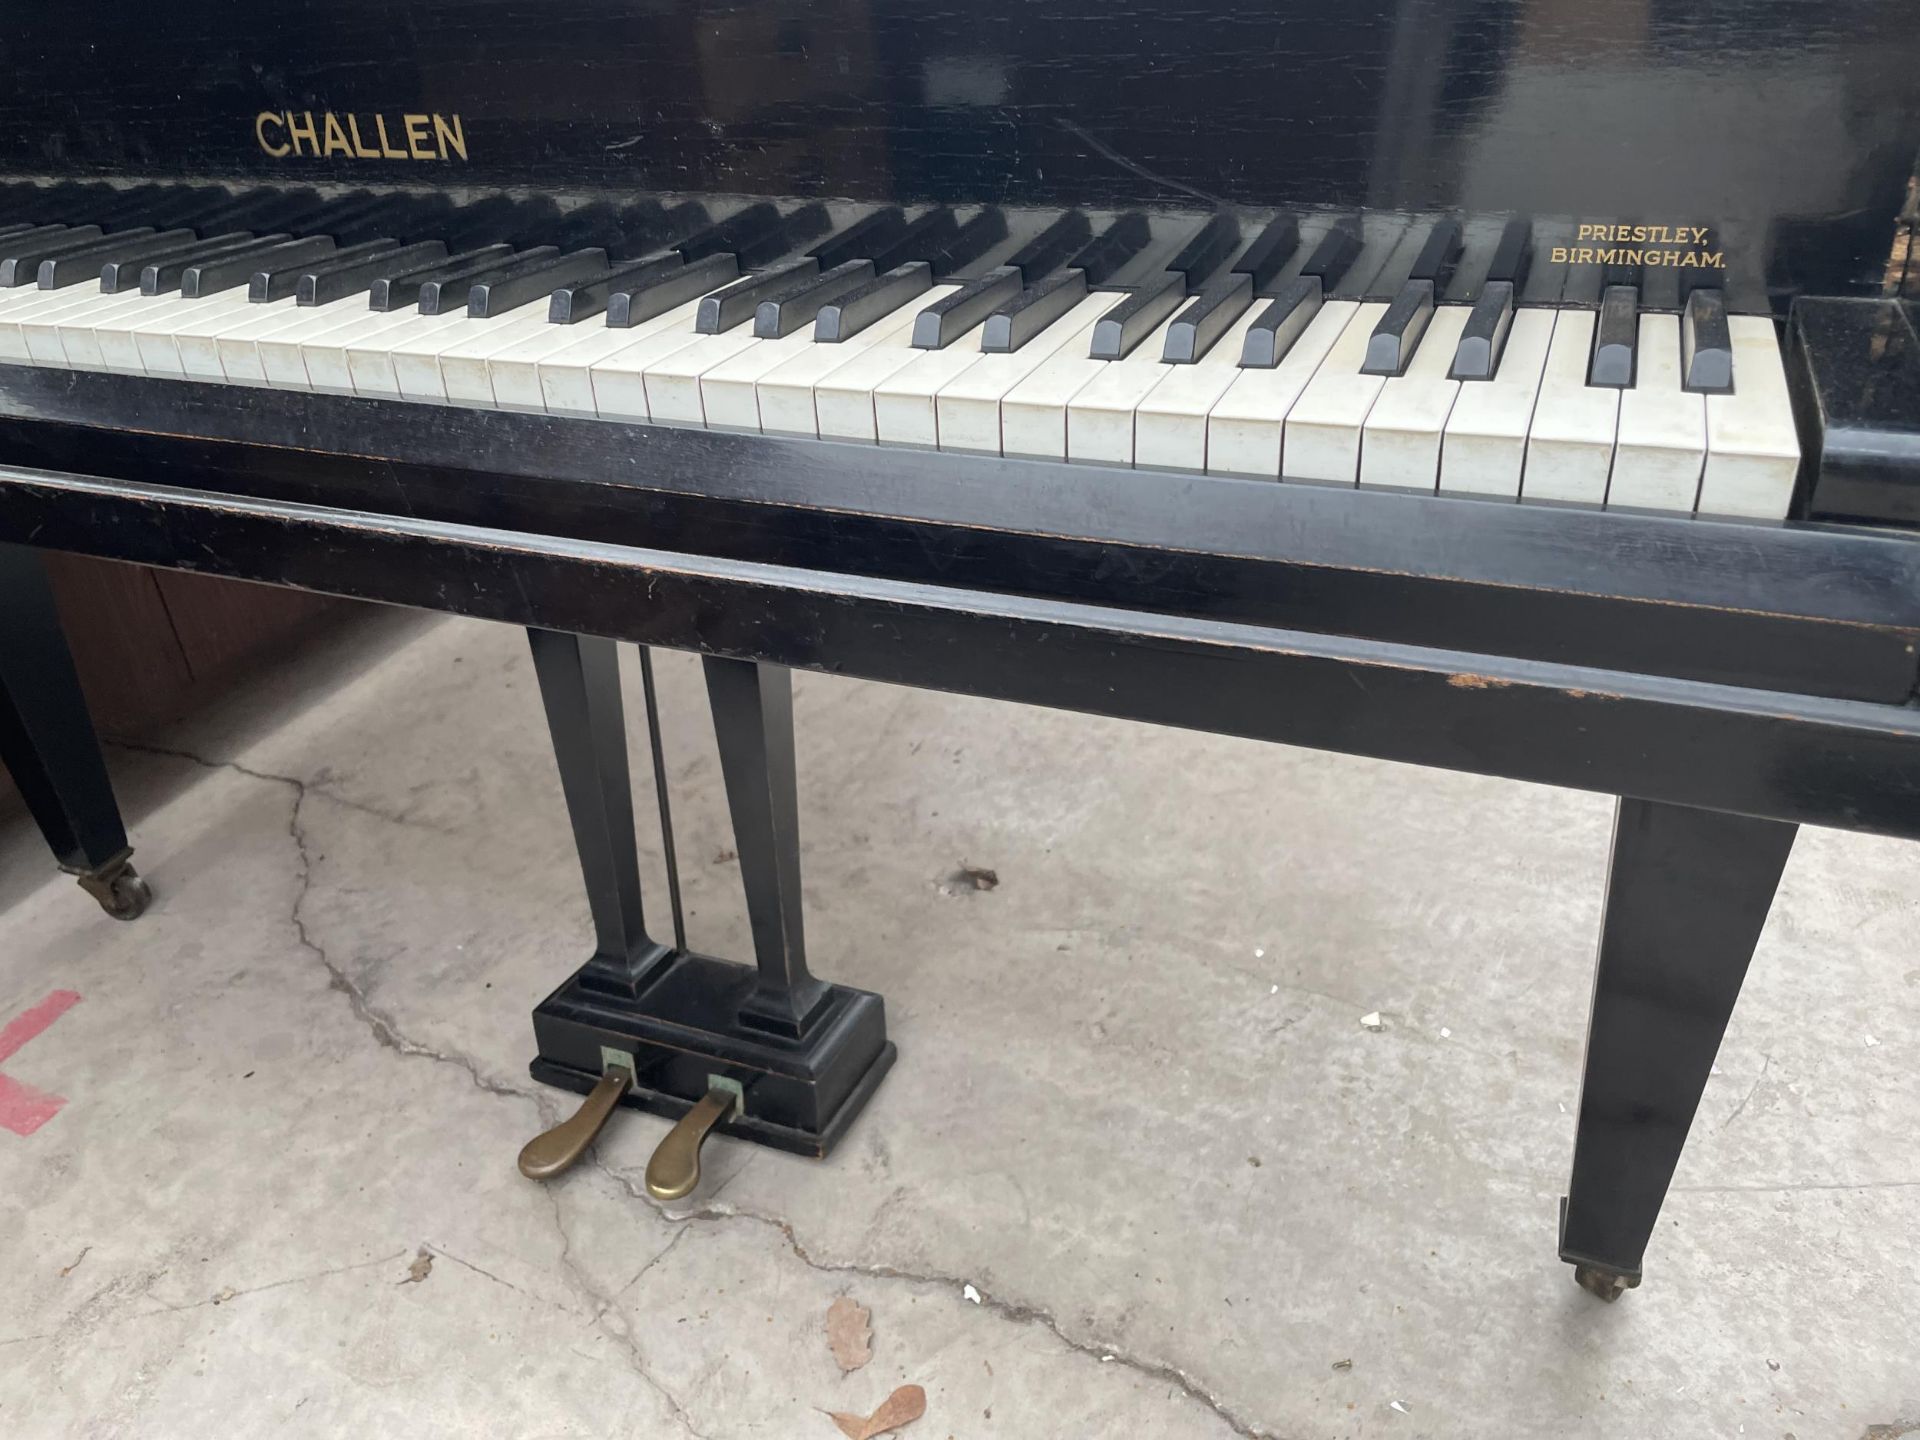 AN EBONISED CHALLEN BABY GRAND PIANO (CHALLEN LONDON EST 1804), 53" IN LENGTH - Image 2 of 4